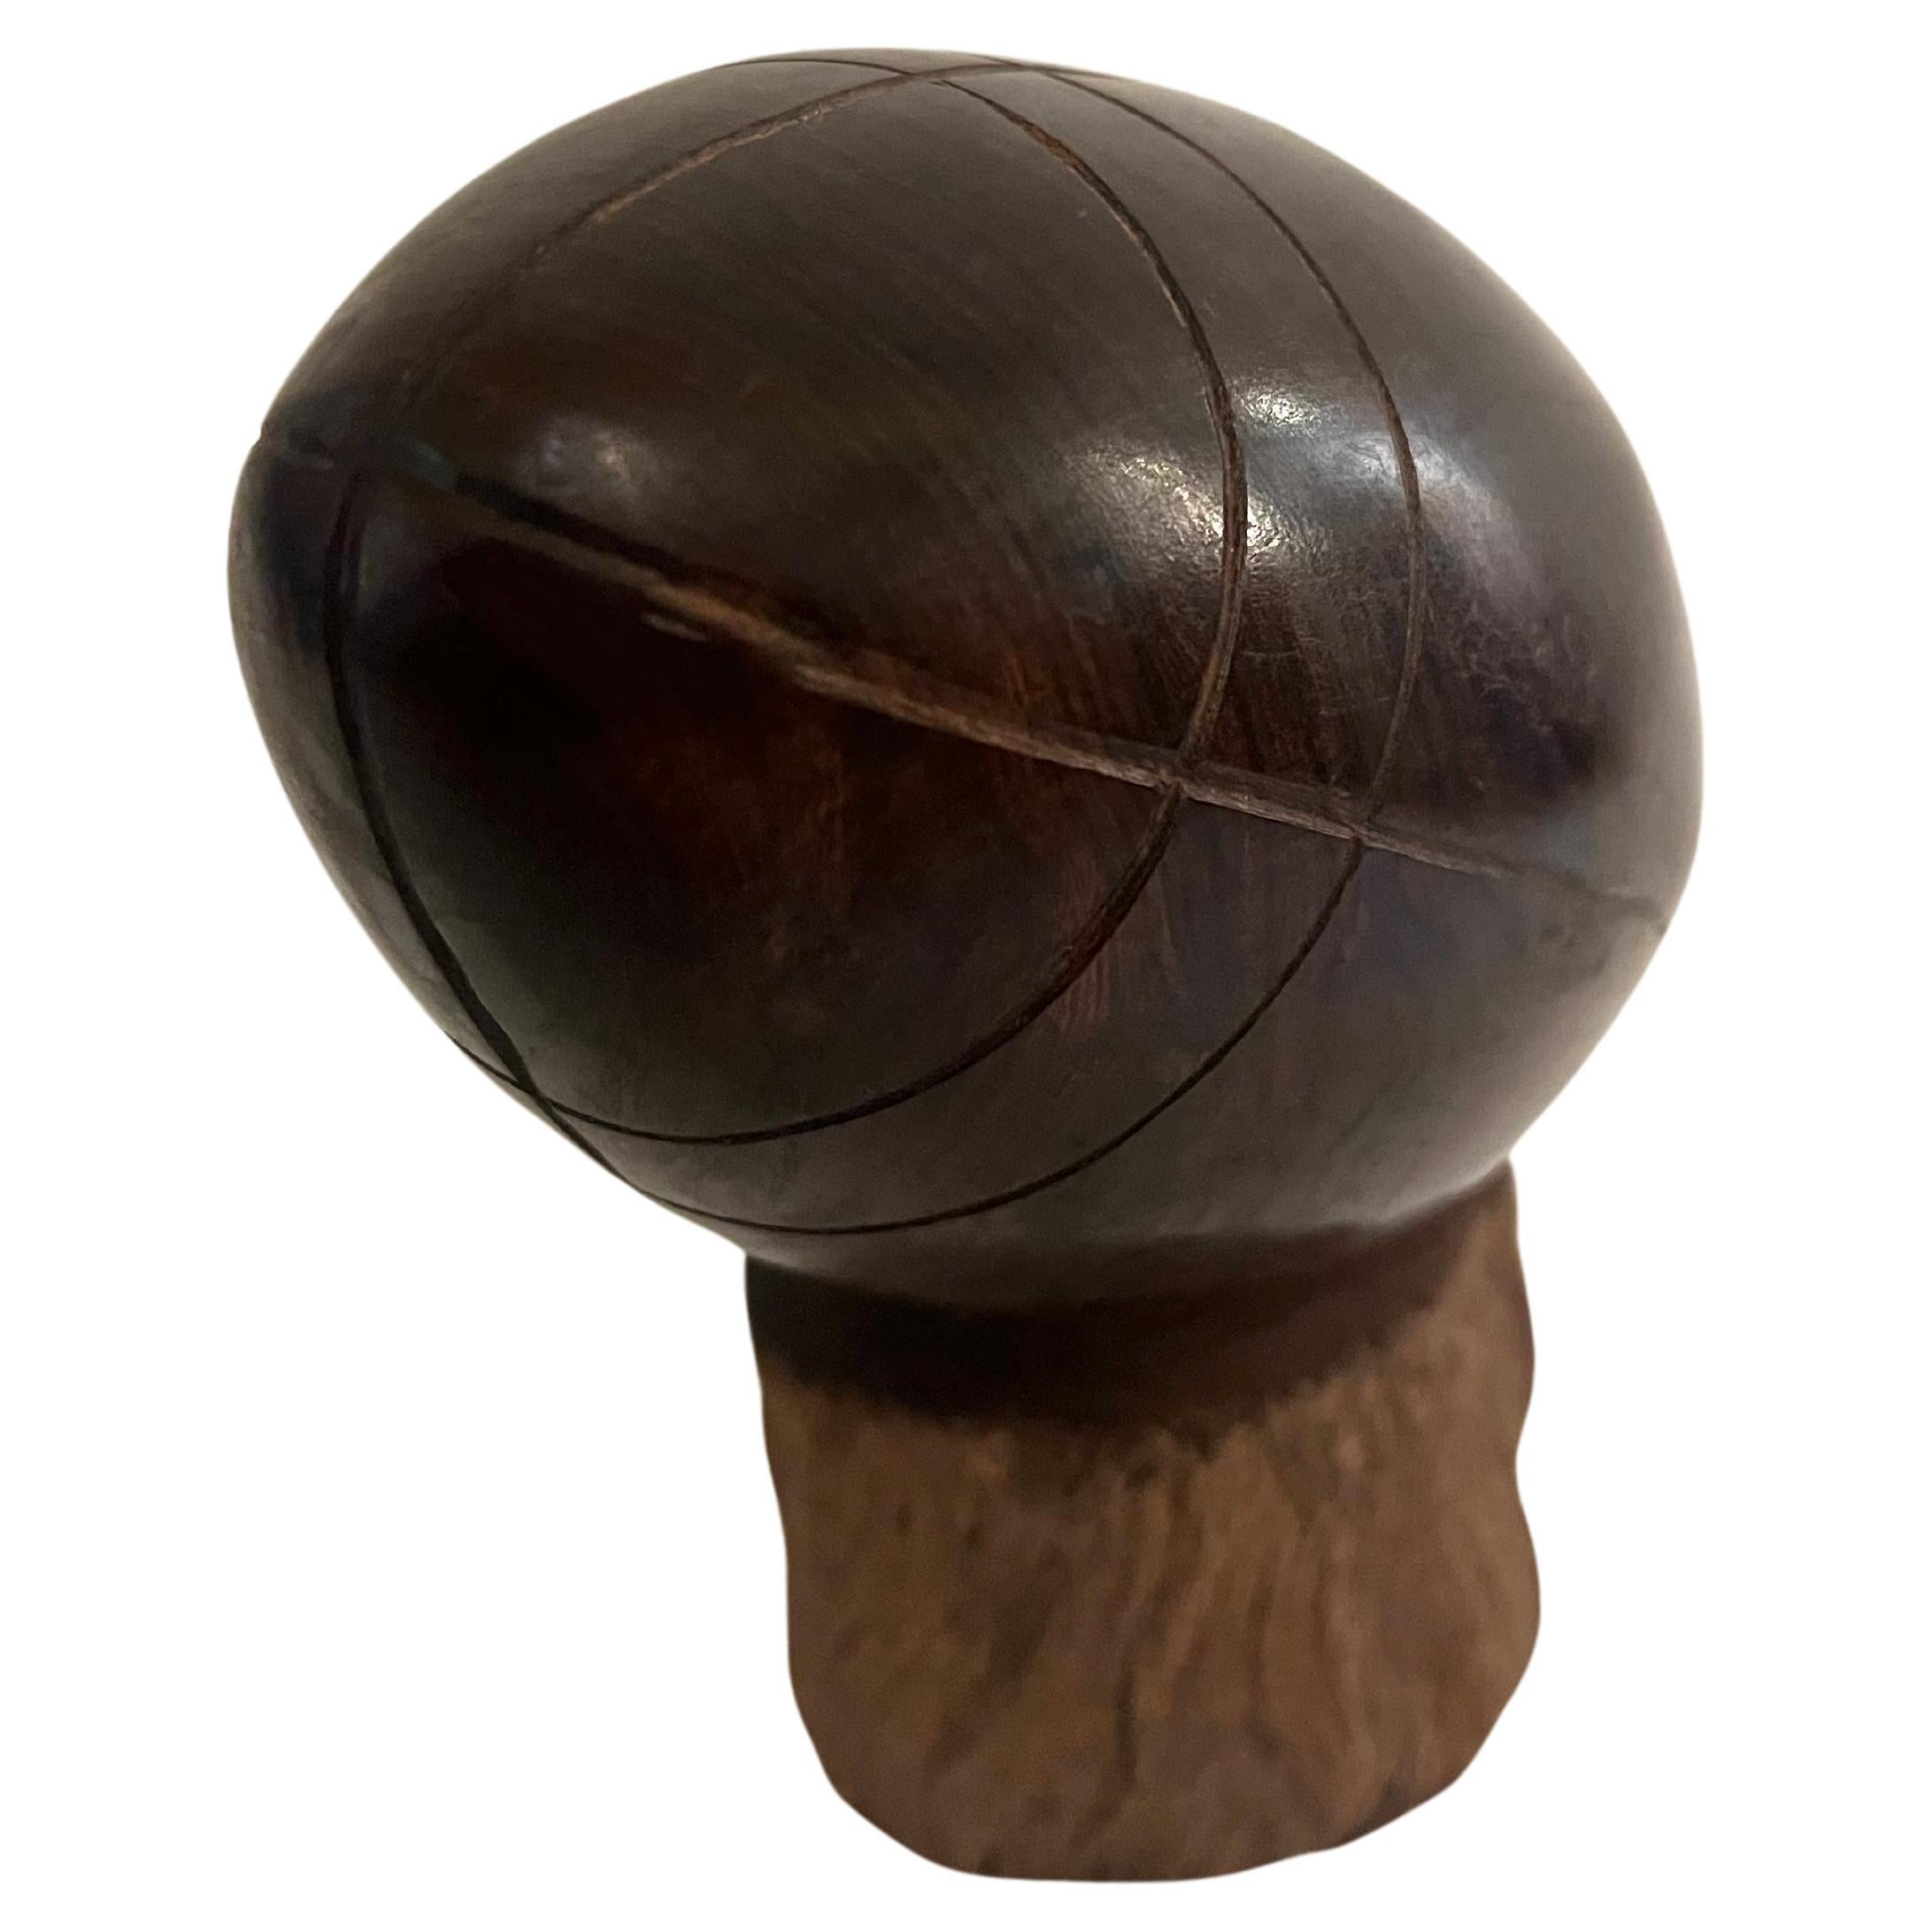 Beautiful hand-carved solid ironwood football circa 1970's great detail and condition, polished ball sitting on a pedestal , a classic of American memorabilia.